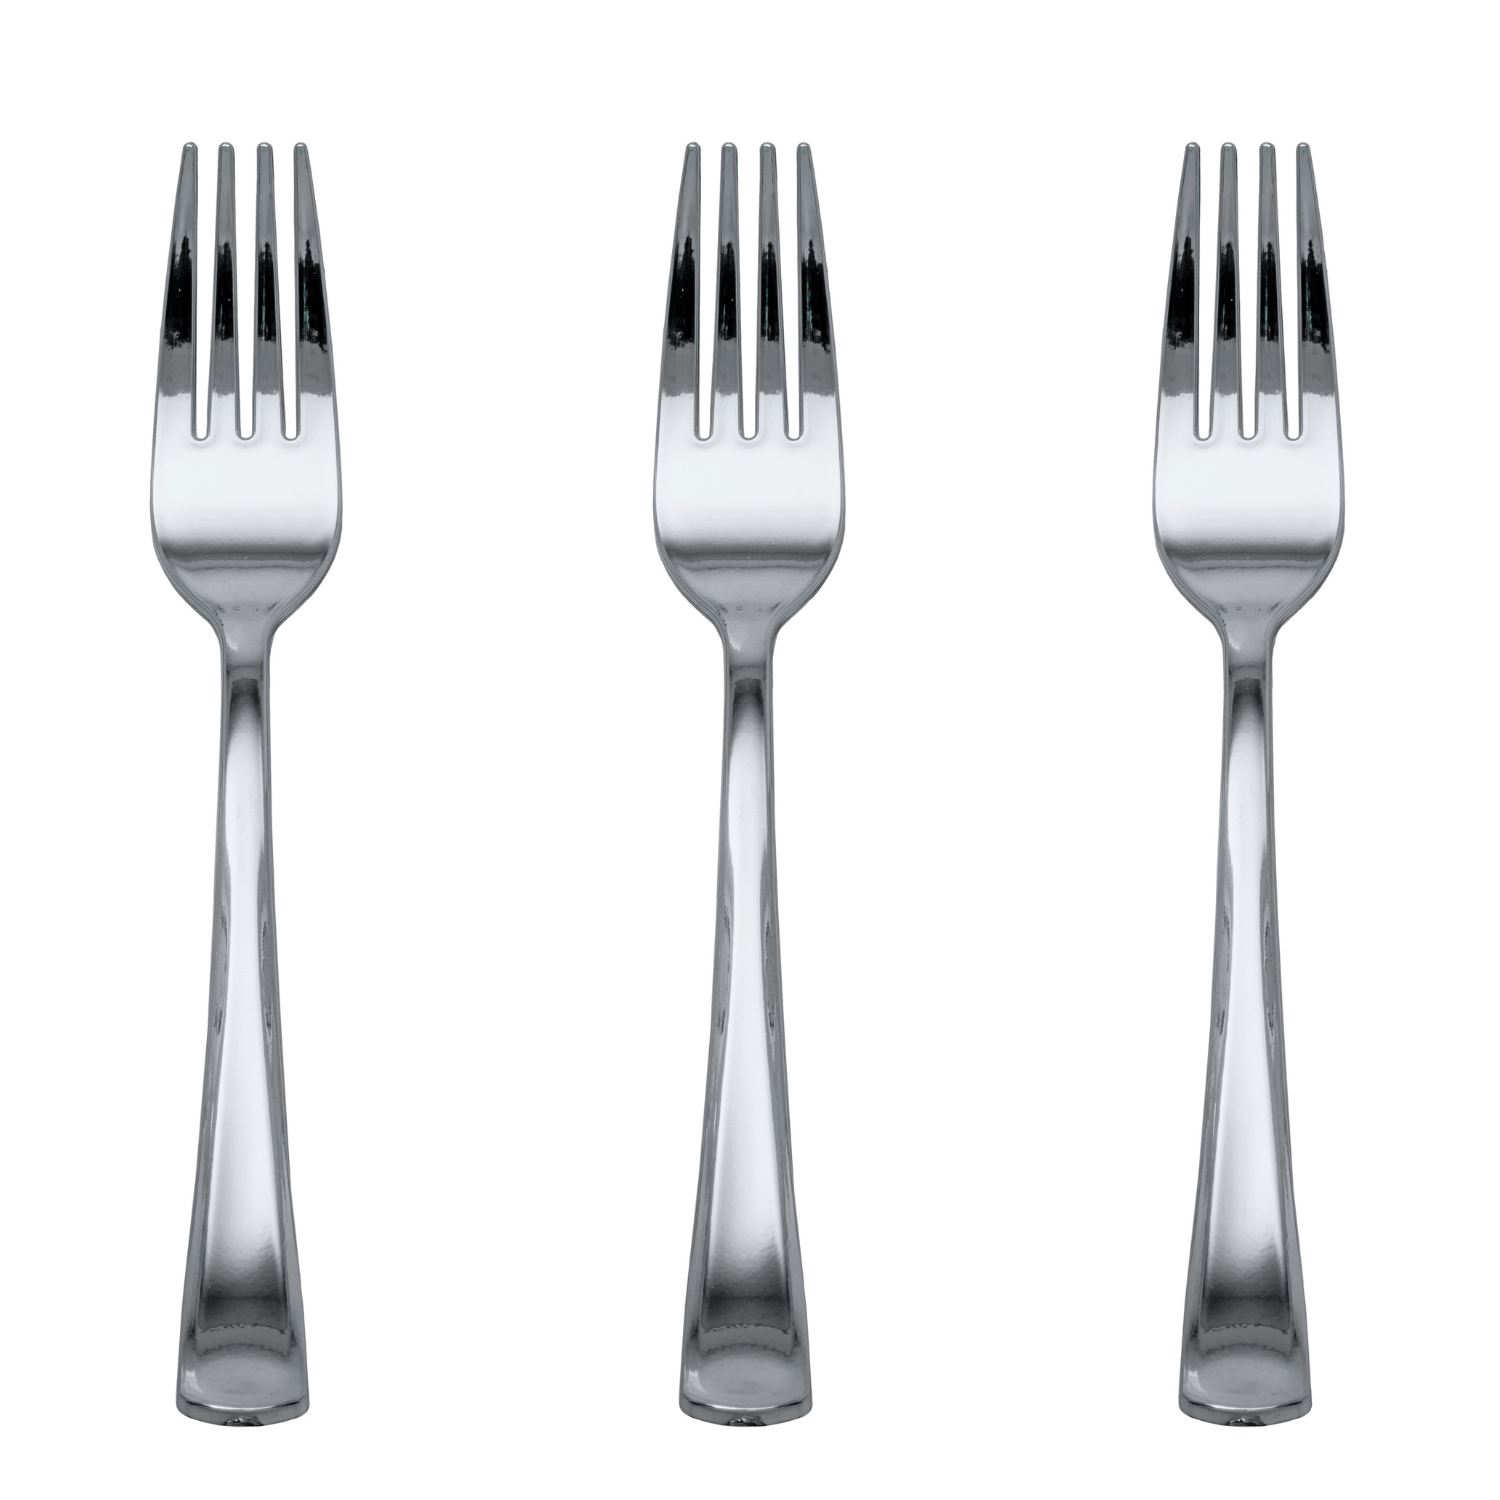 Exquisite Silver Plastic Forks | 480 Count - Yom Tov Settings